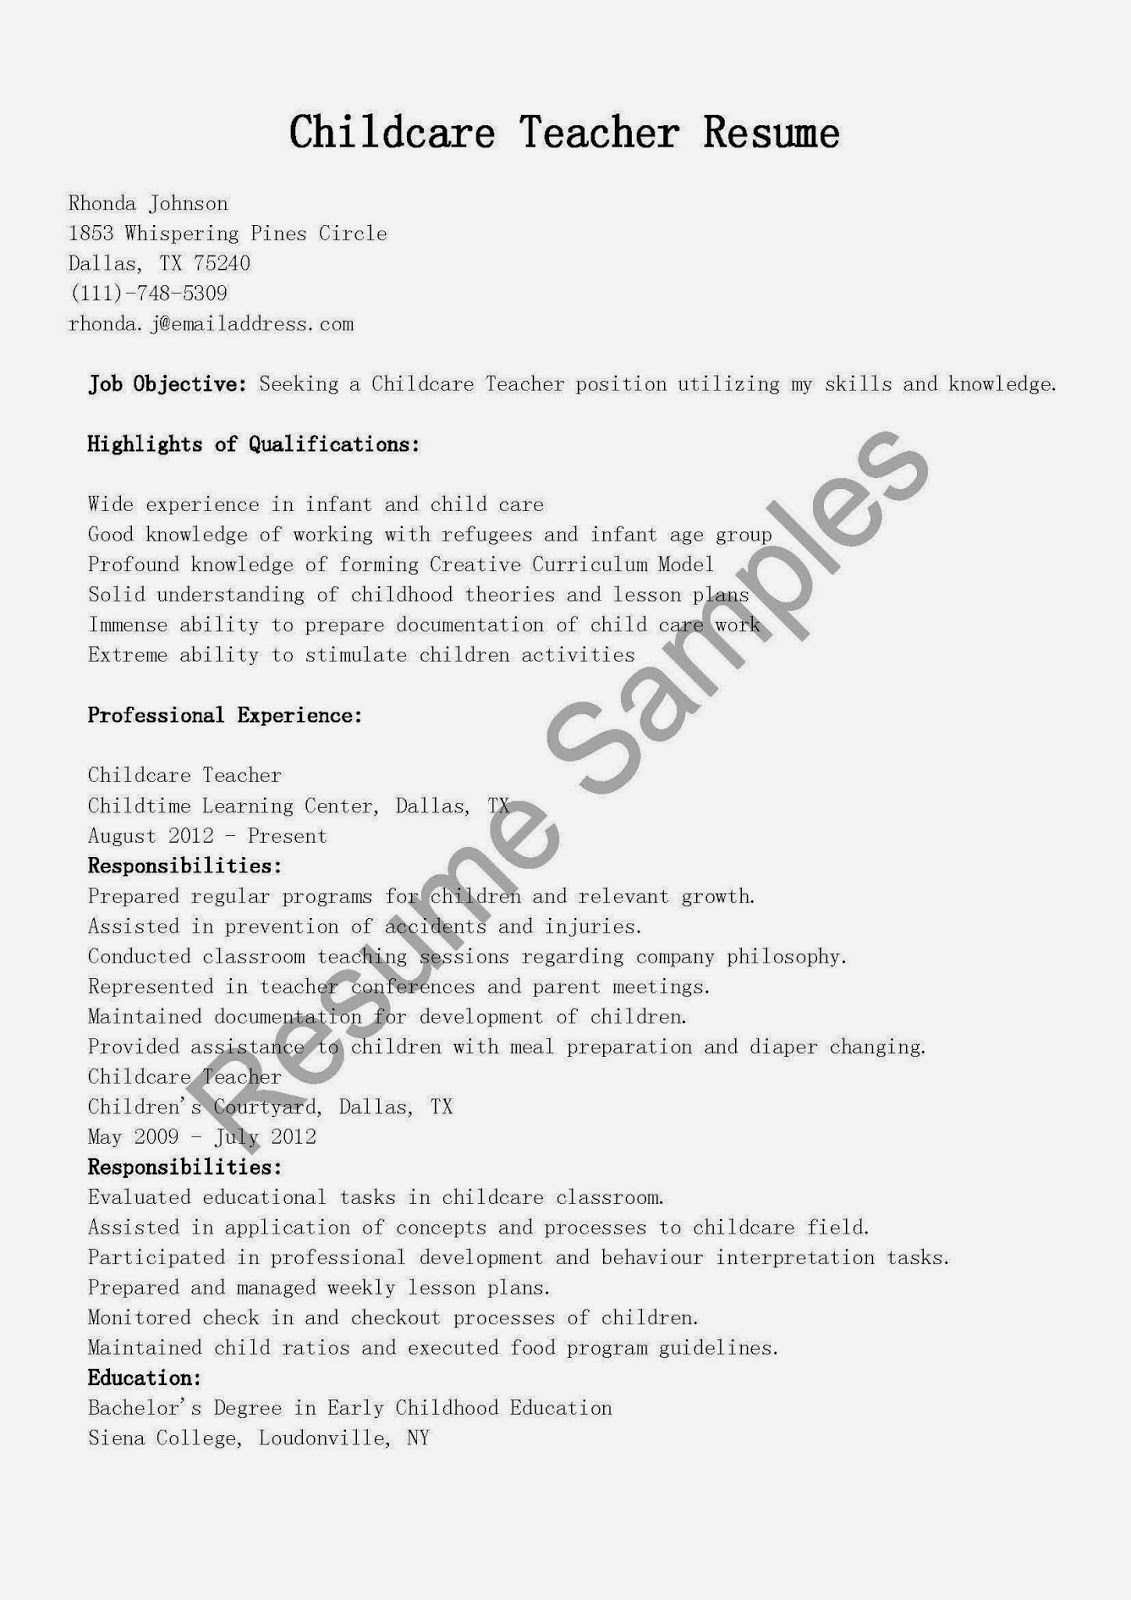 Child Care Resume Template New 35 Excellent Child Care Provider Skills for Resume We